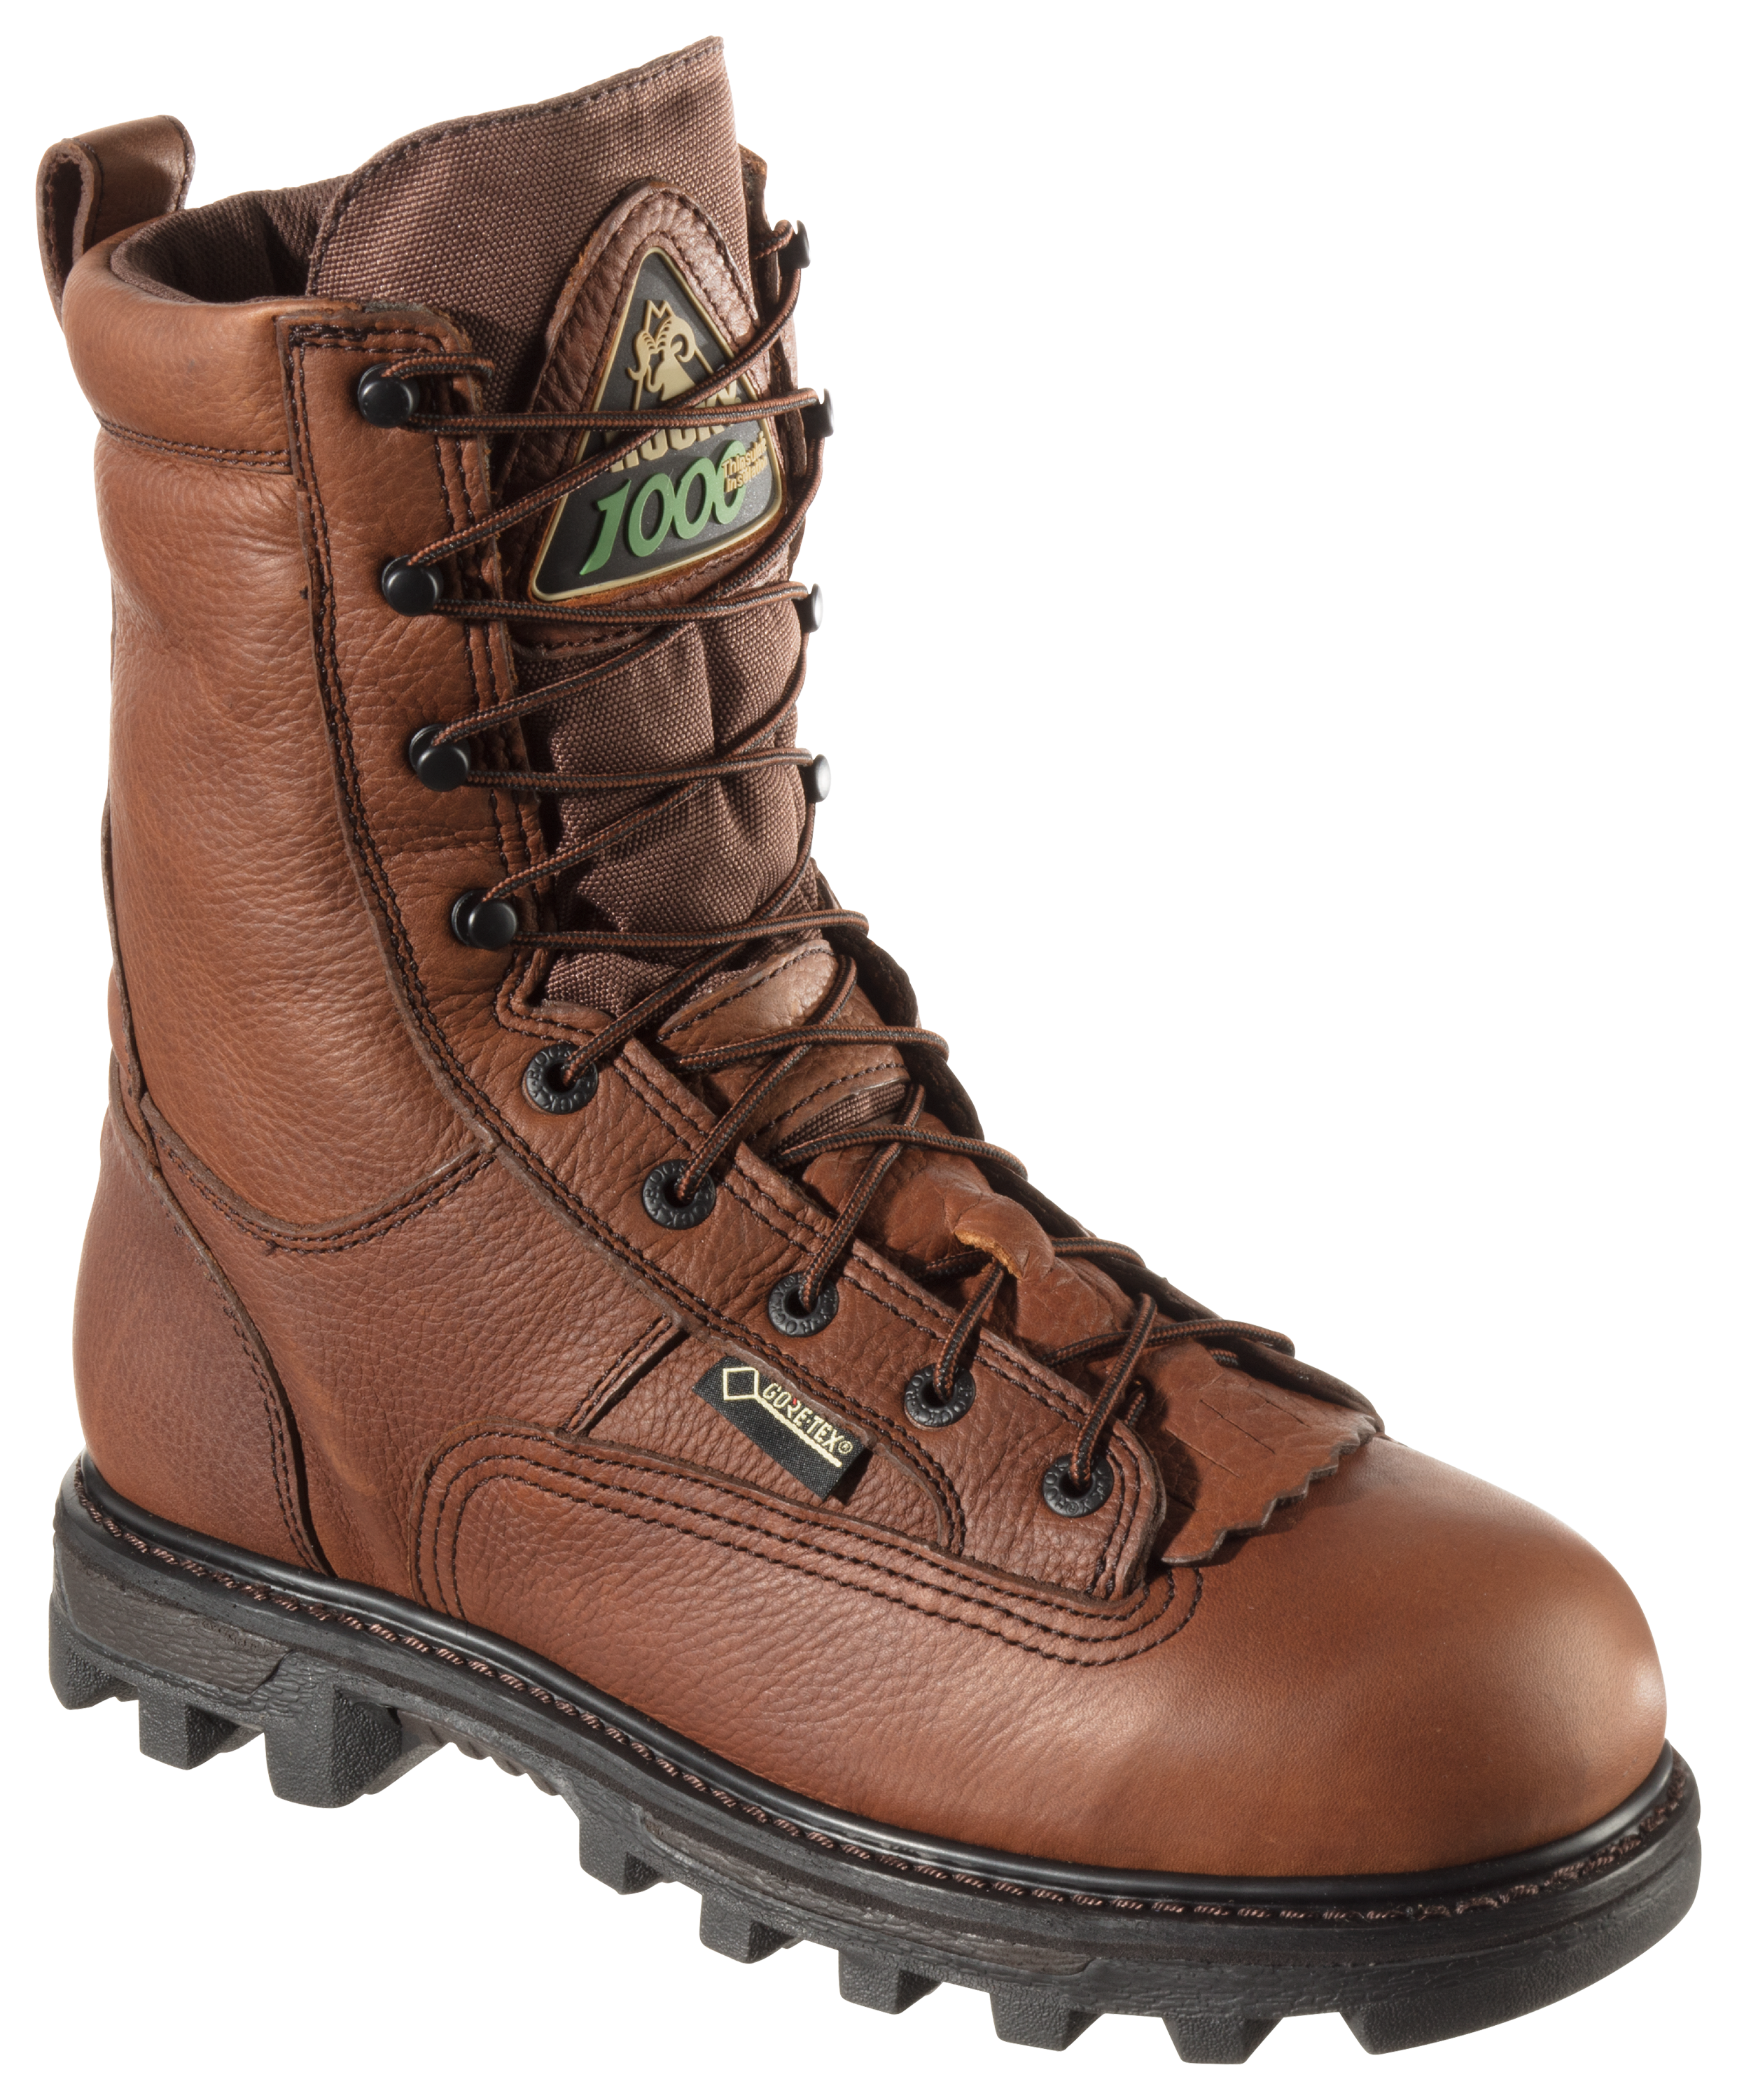 ROCKY BearClaw 3D GORE-TEX 1,000-Gram Insulated Hunting Boots for Men - Brown - 14W